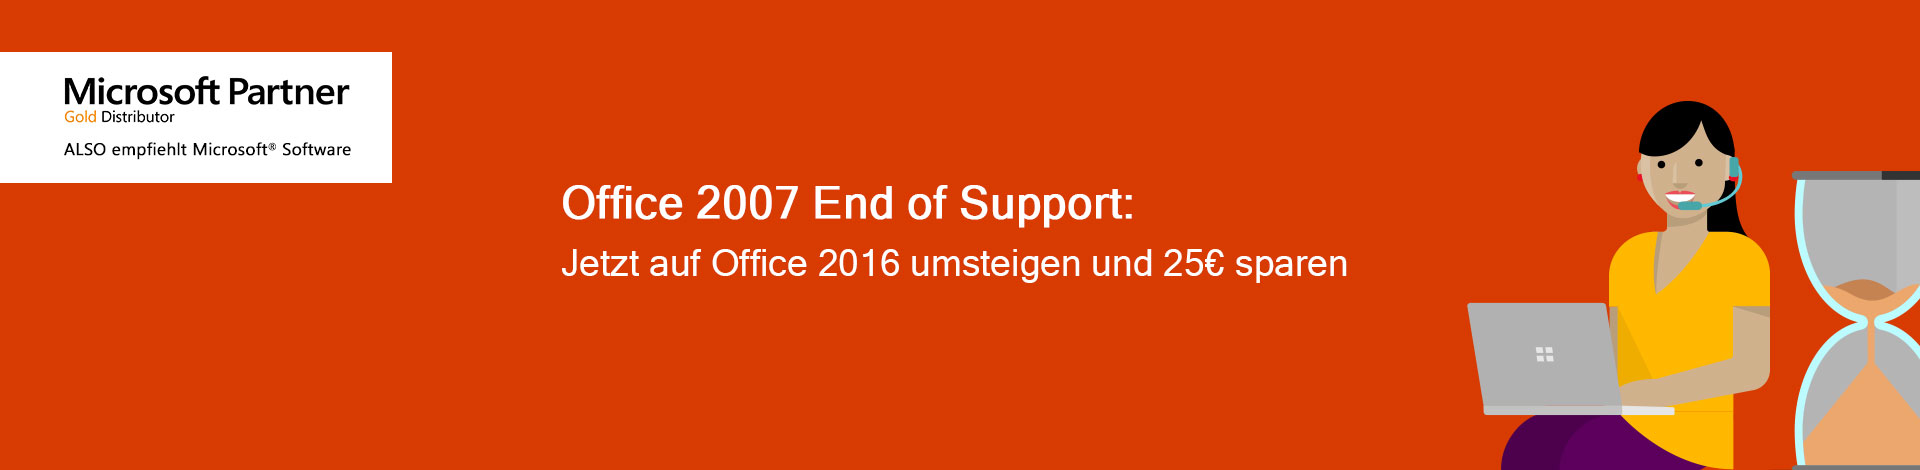 Microsoft Office 2007 End of Support